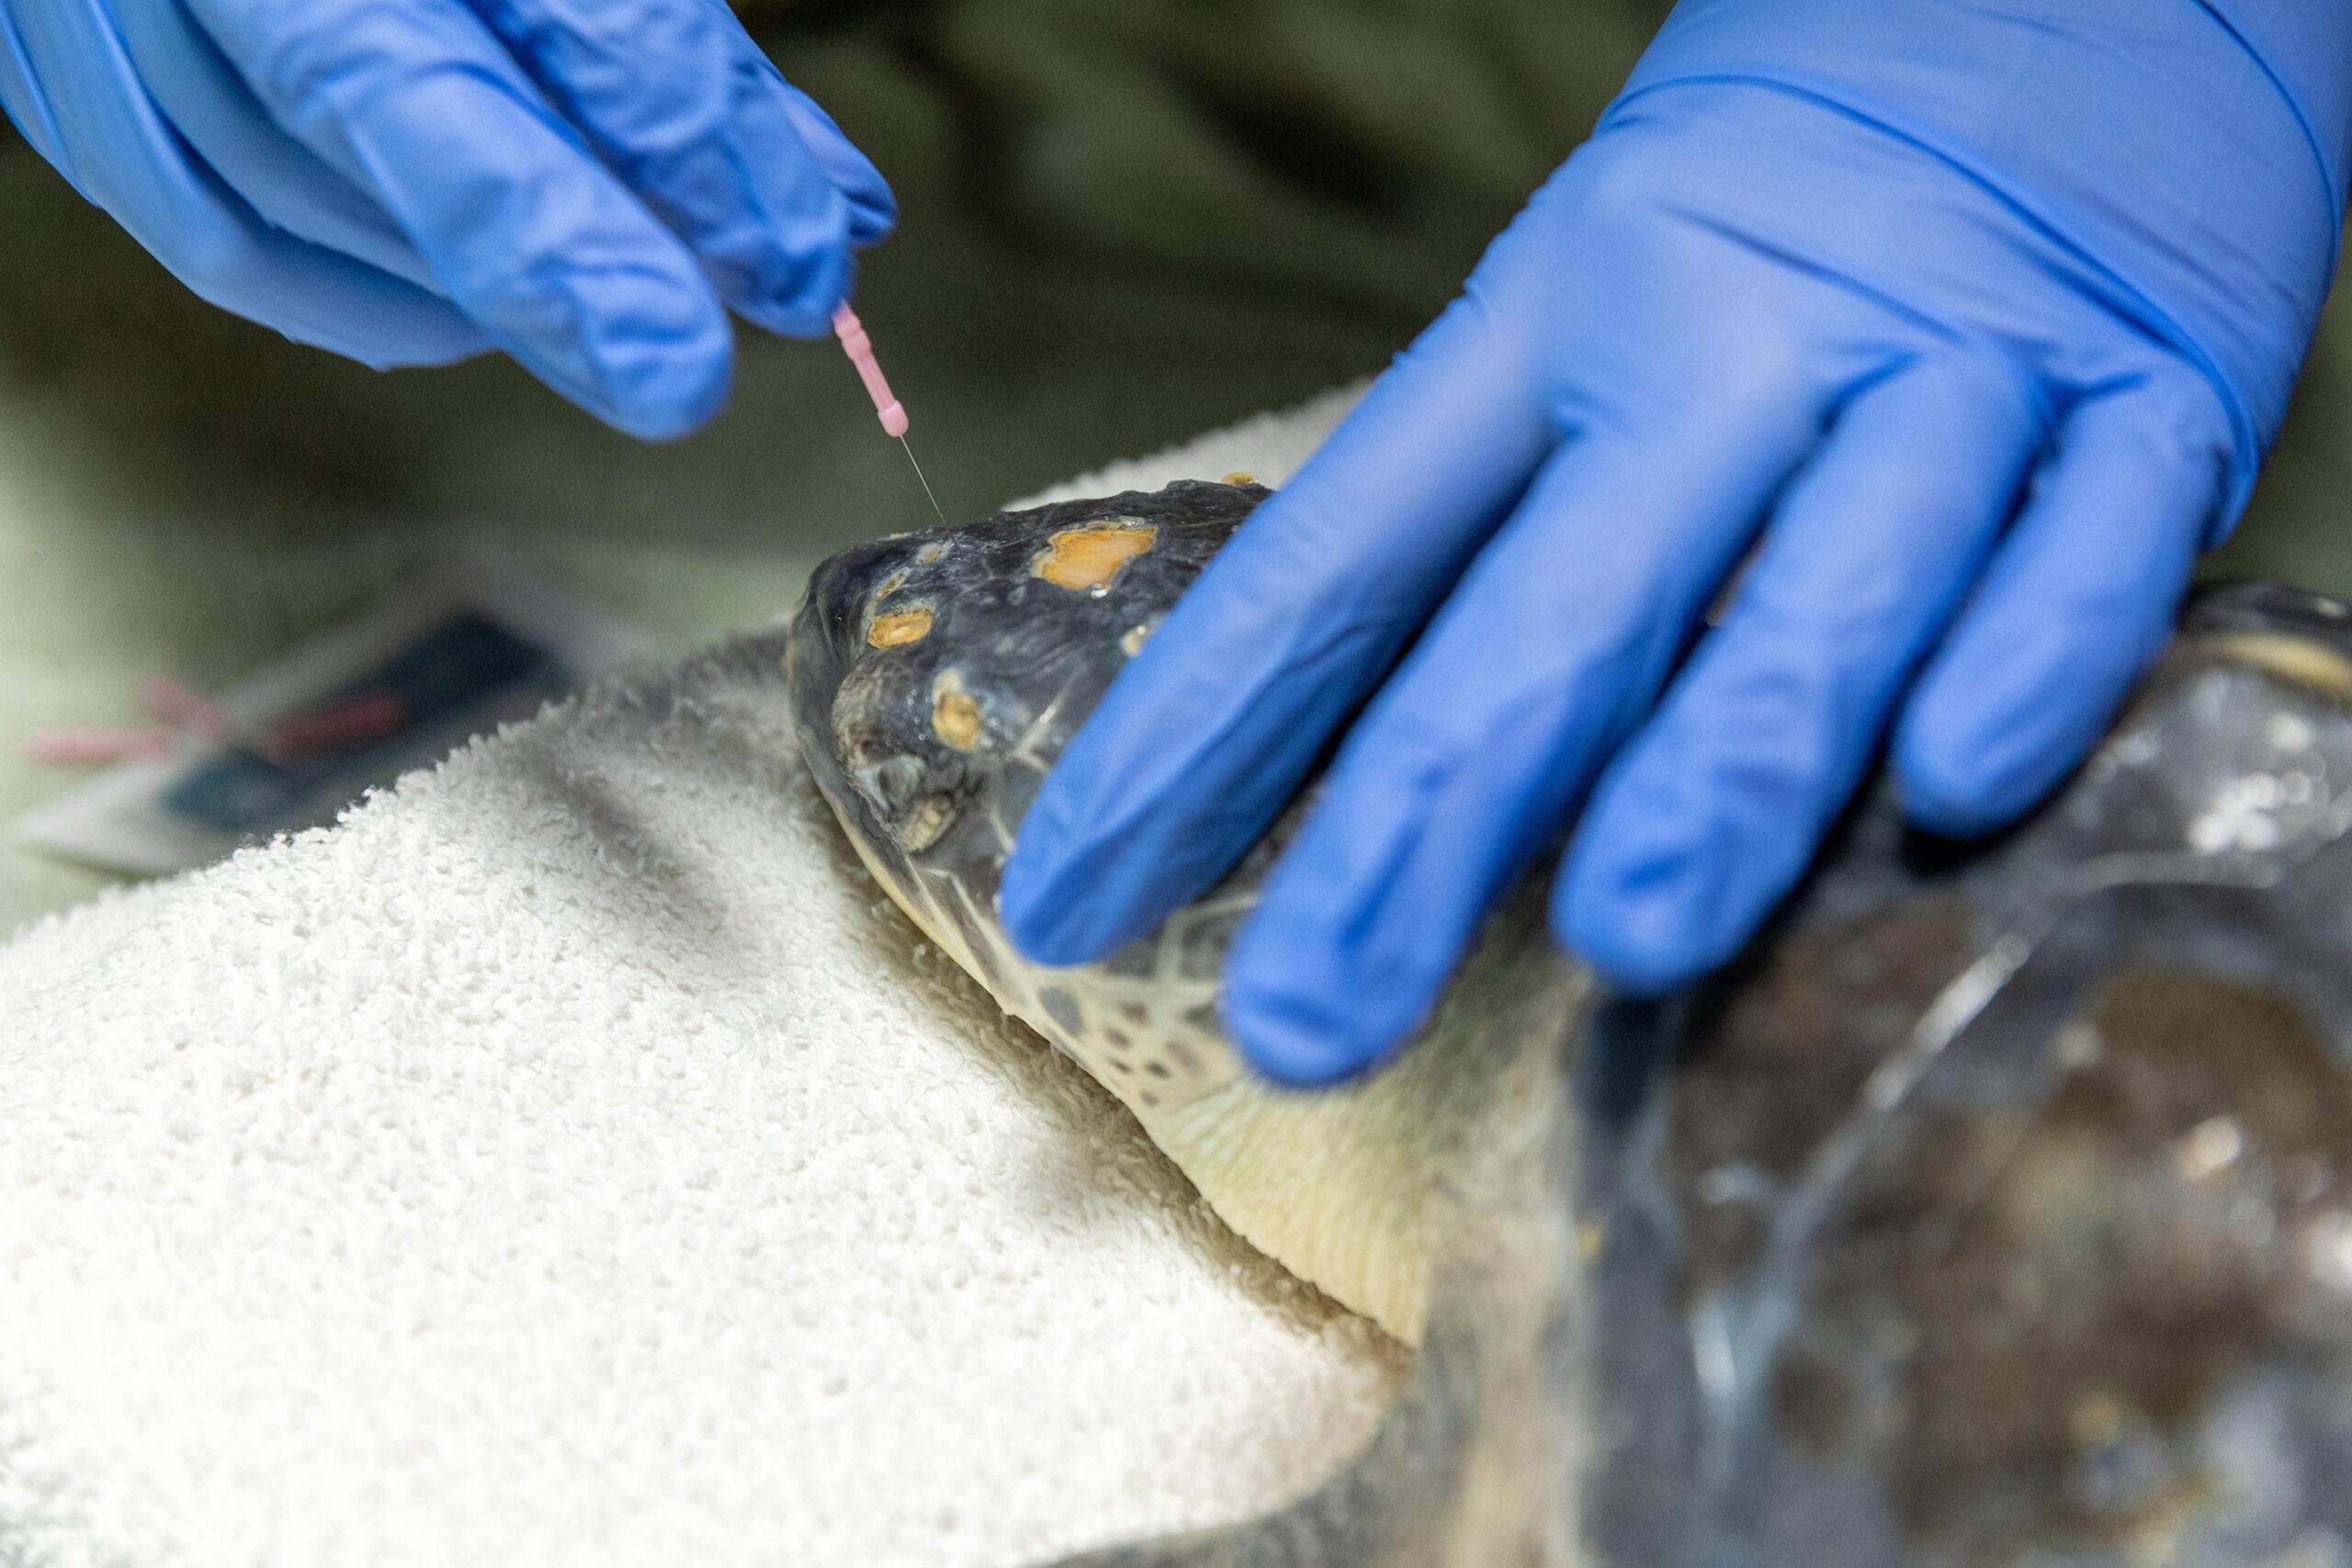 Rescued sea turtle gets acupuncture to treat injured jaw